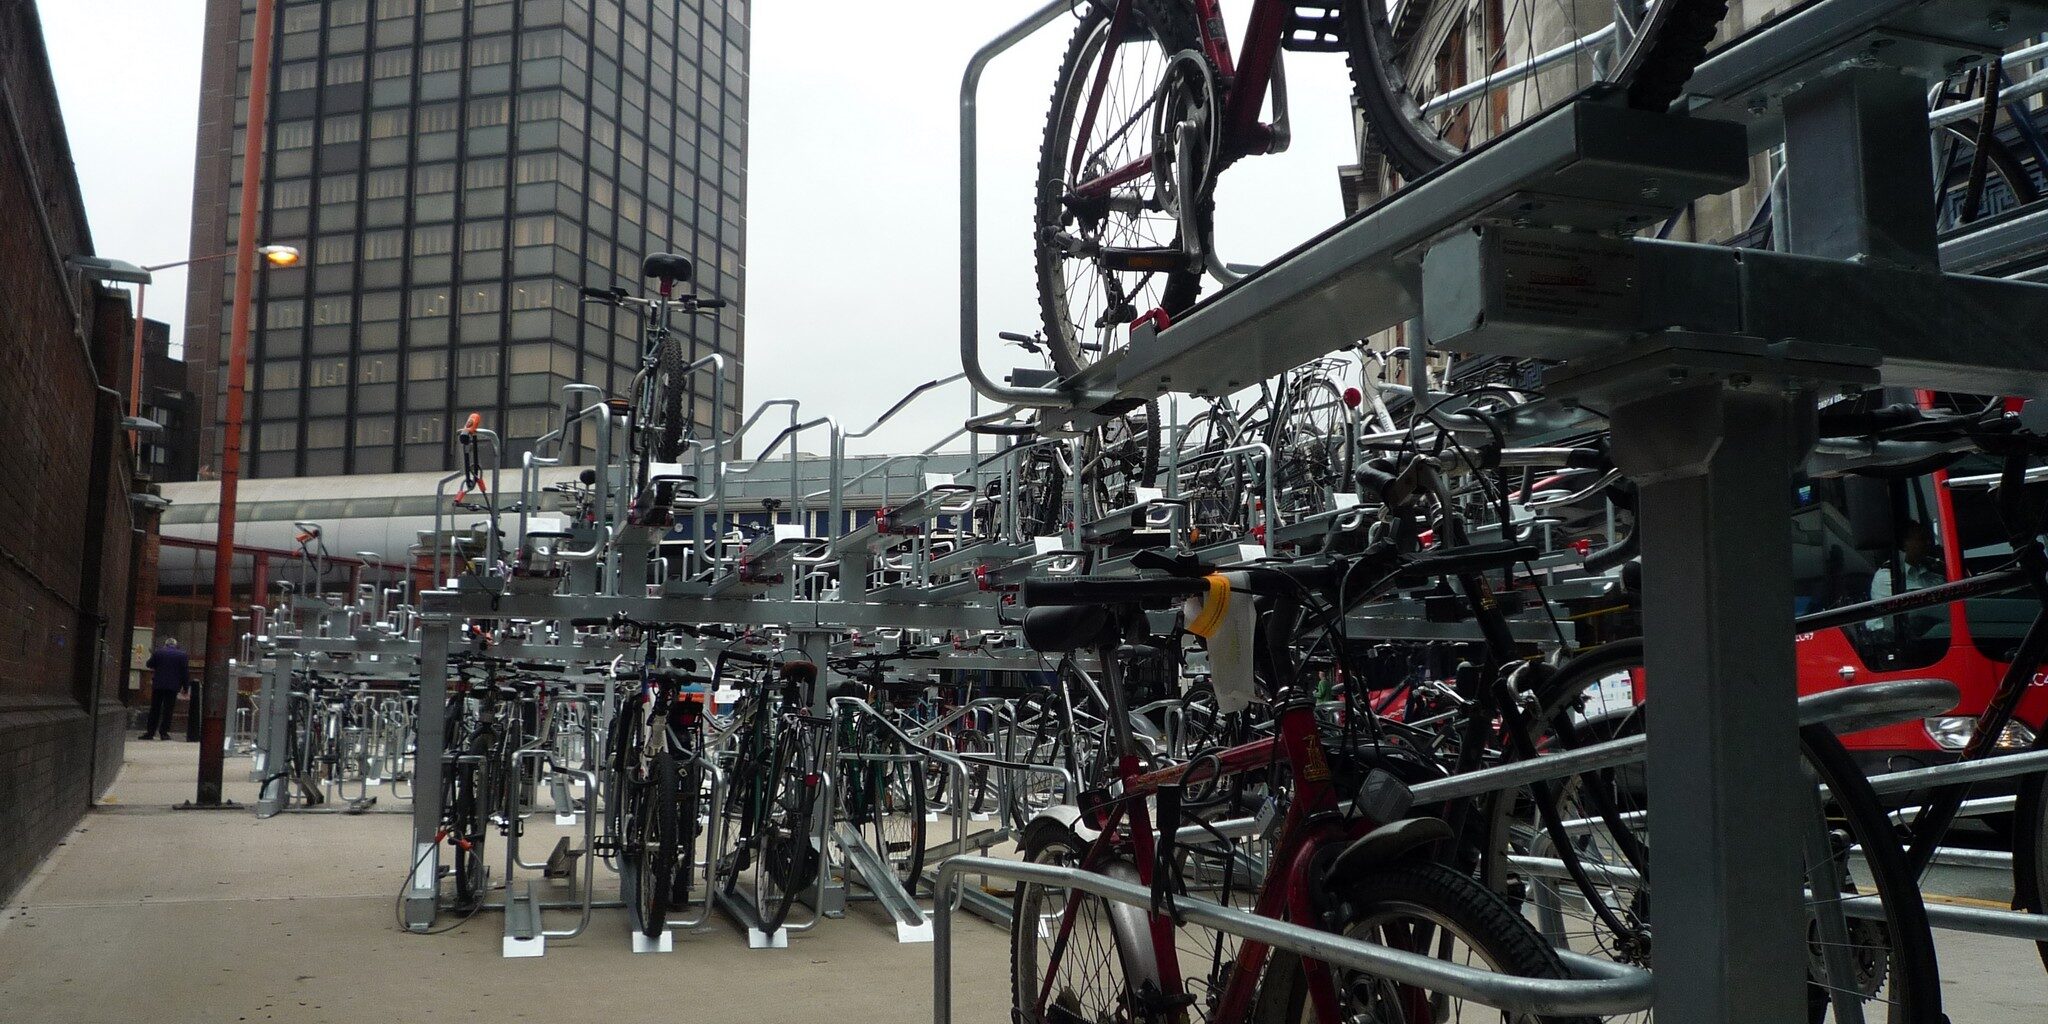 waterloo_station_cycle_parking_project-4